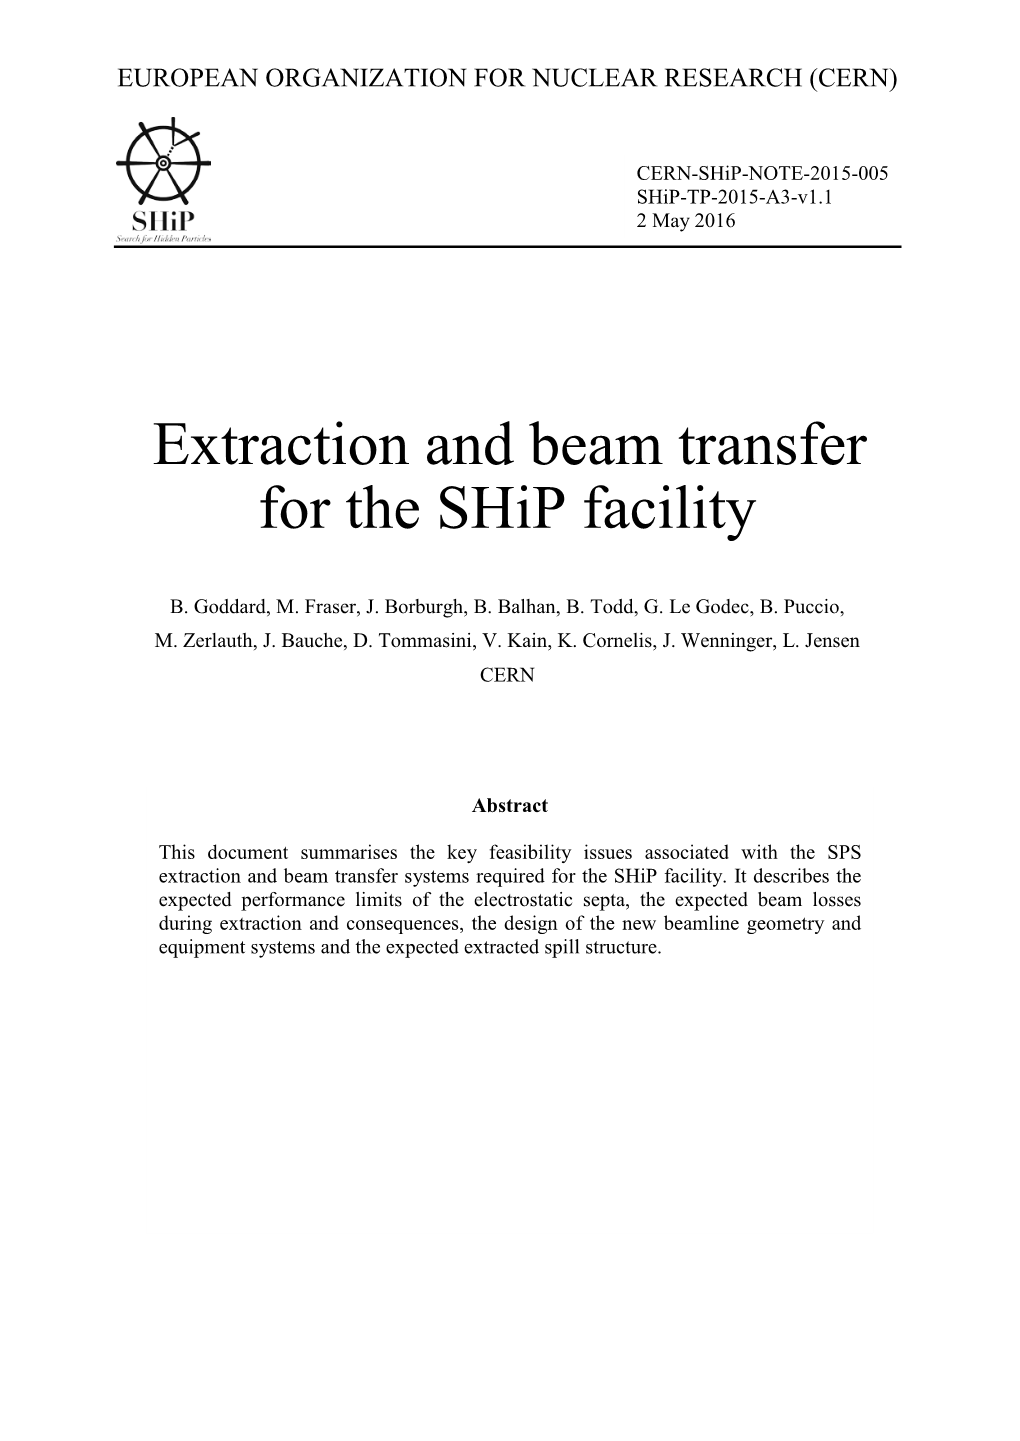 Extraction and Beam Transfer for the Ship Facility